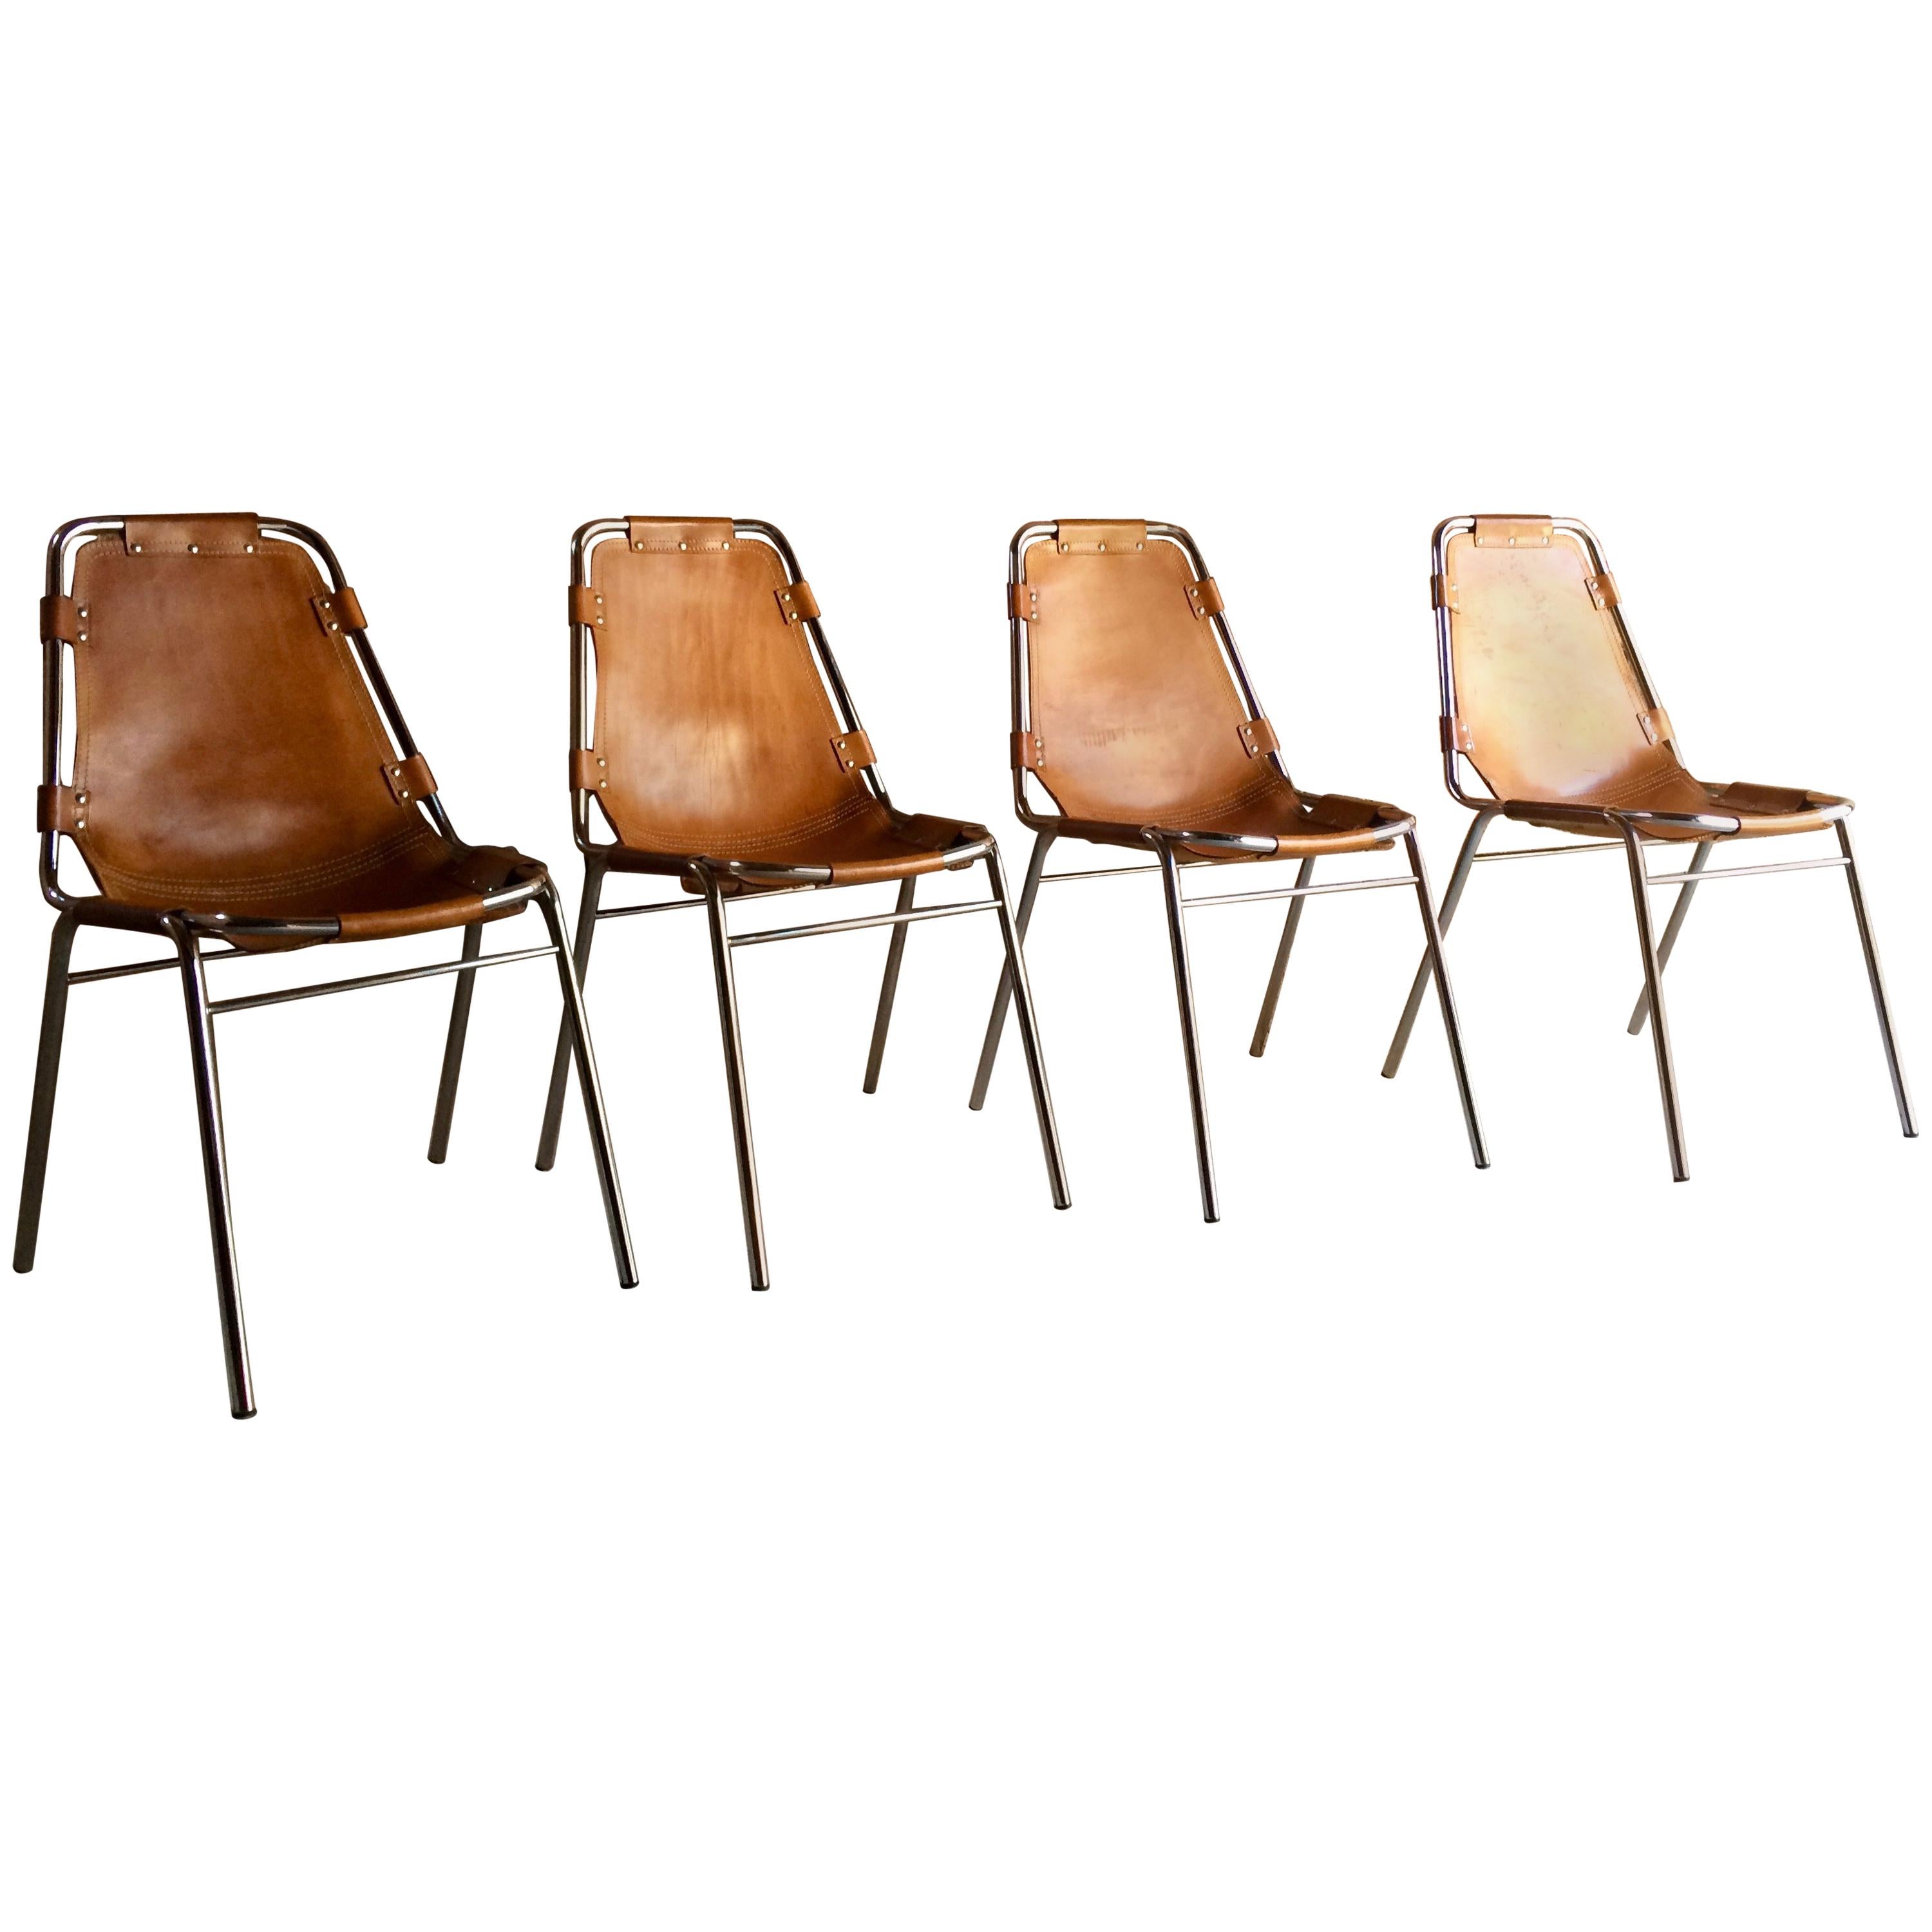 Mid-Century Modern Les Arcs Set of Four Leather Tan Dining Chairs, 1970s